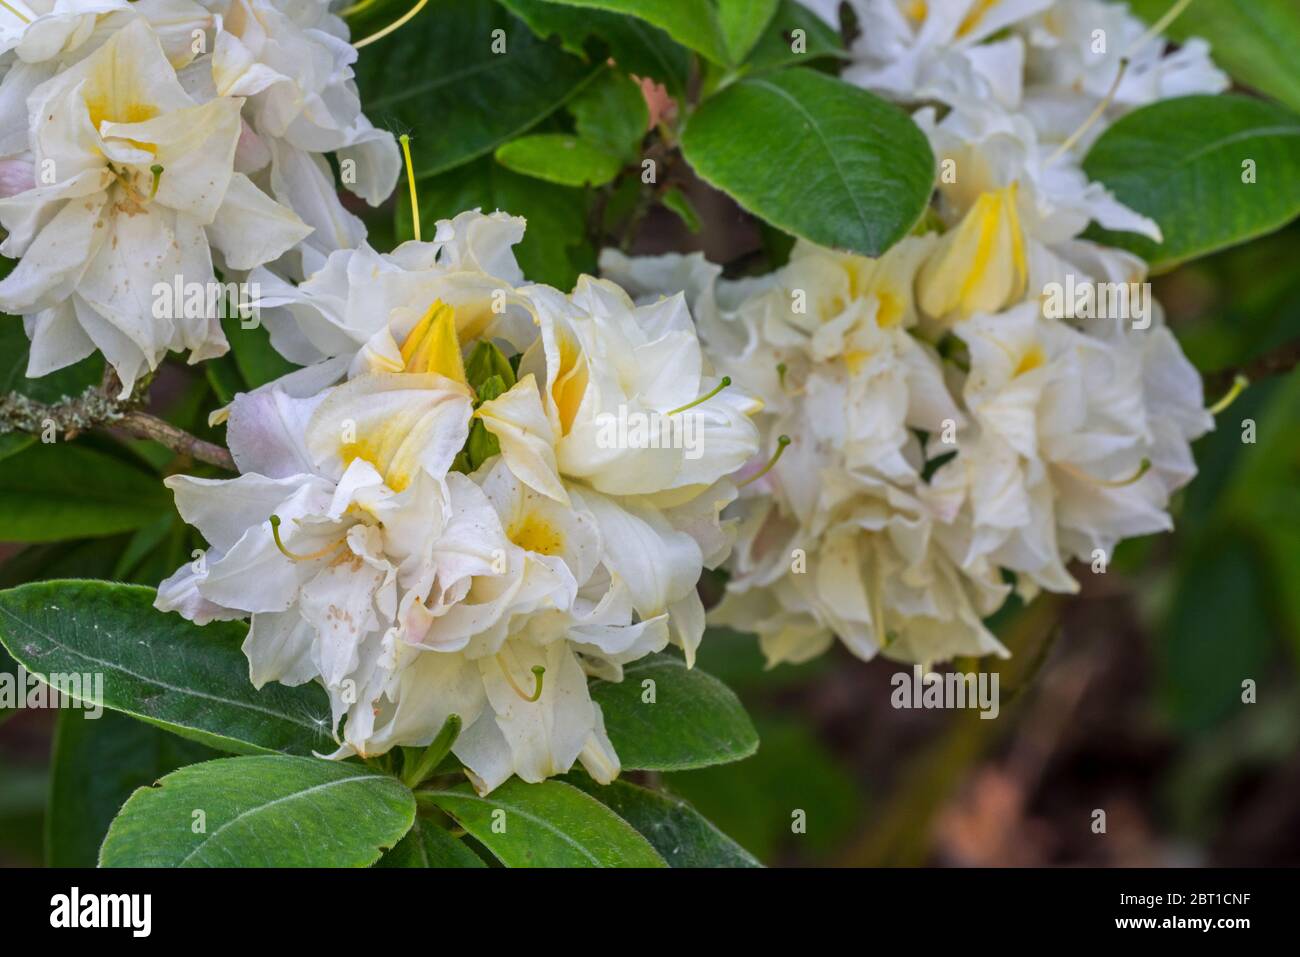 Azalea Chelsea Reach / Chelsea Reach Rhododendron, close up showing white flowers and leaves in spring Stock Photo